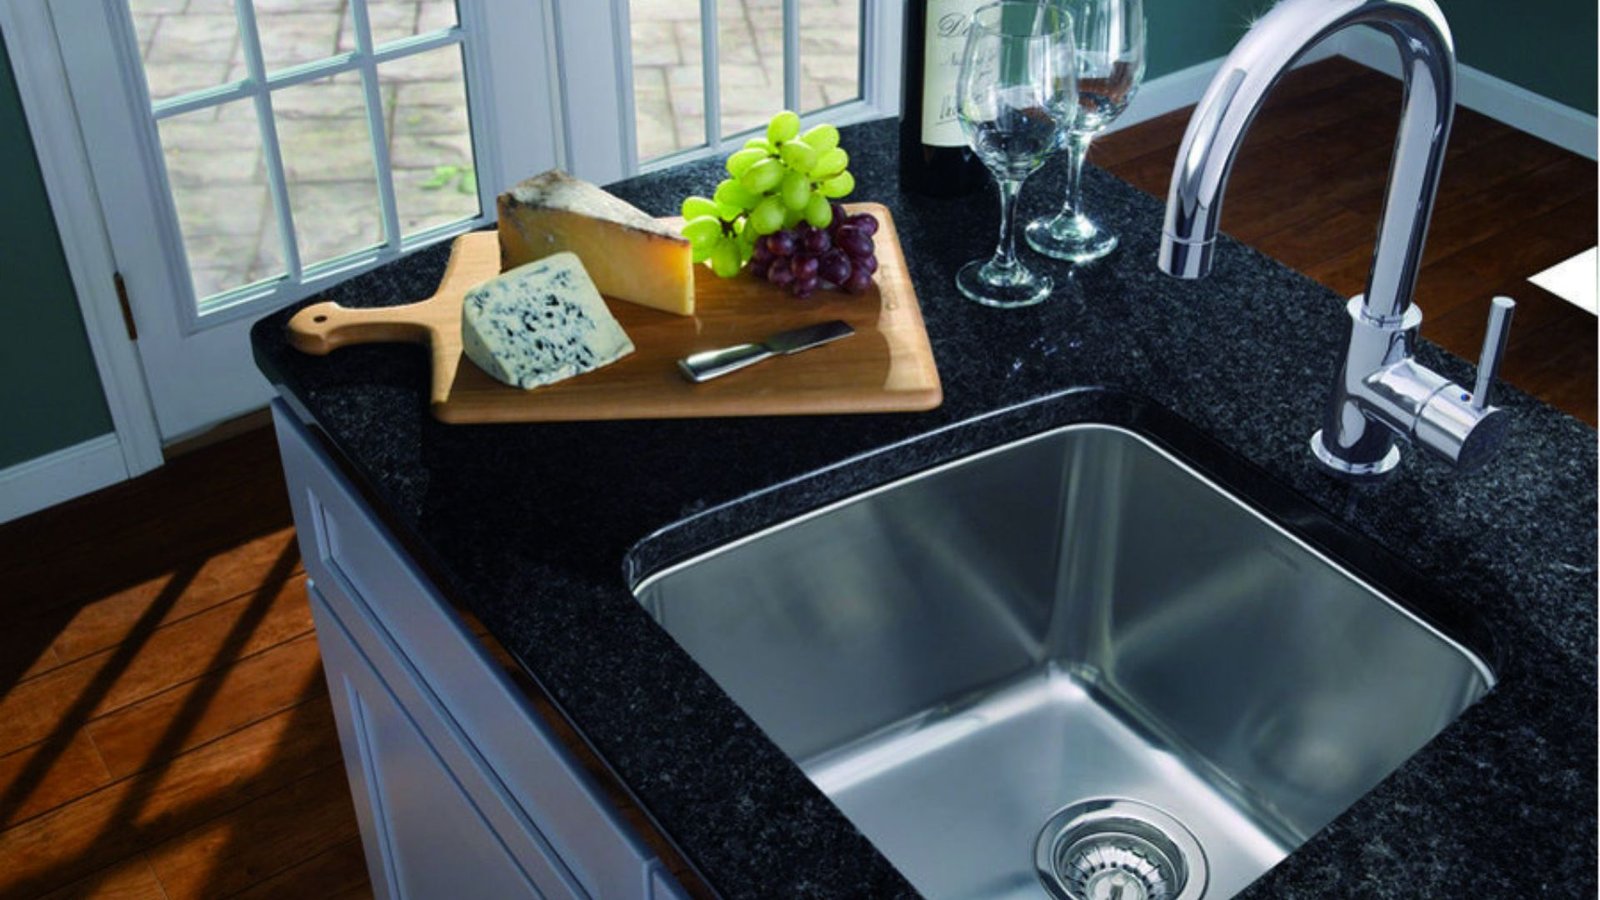 Choosing thе Pеrfеct Kitchеn Sink Mixеr for Your Homе 